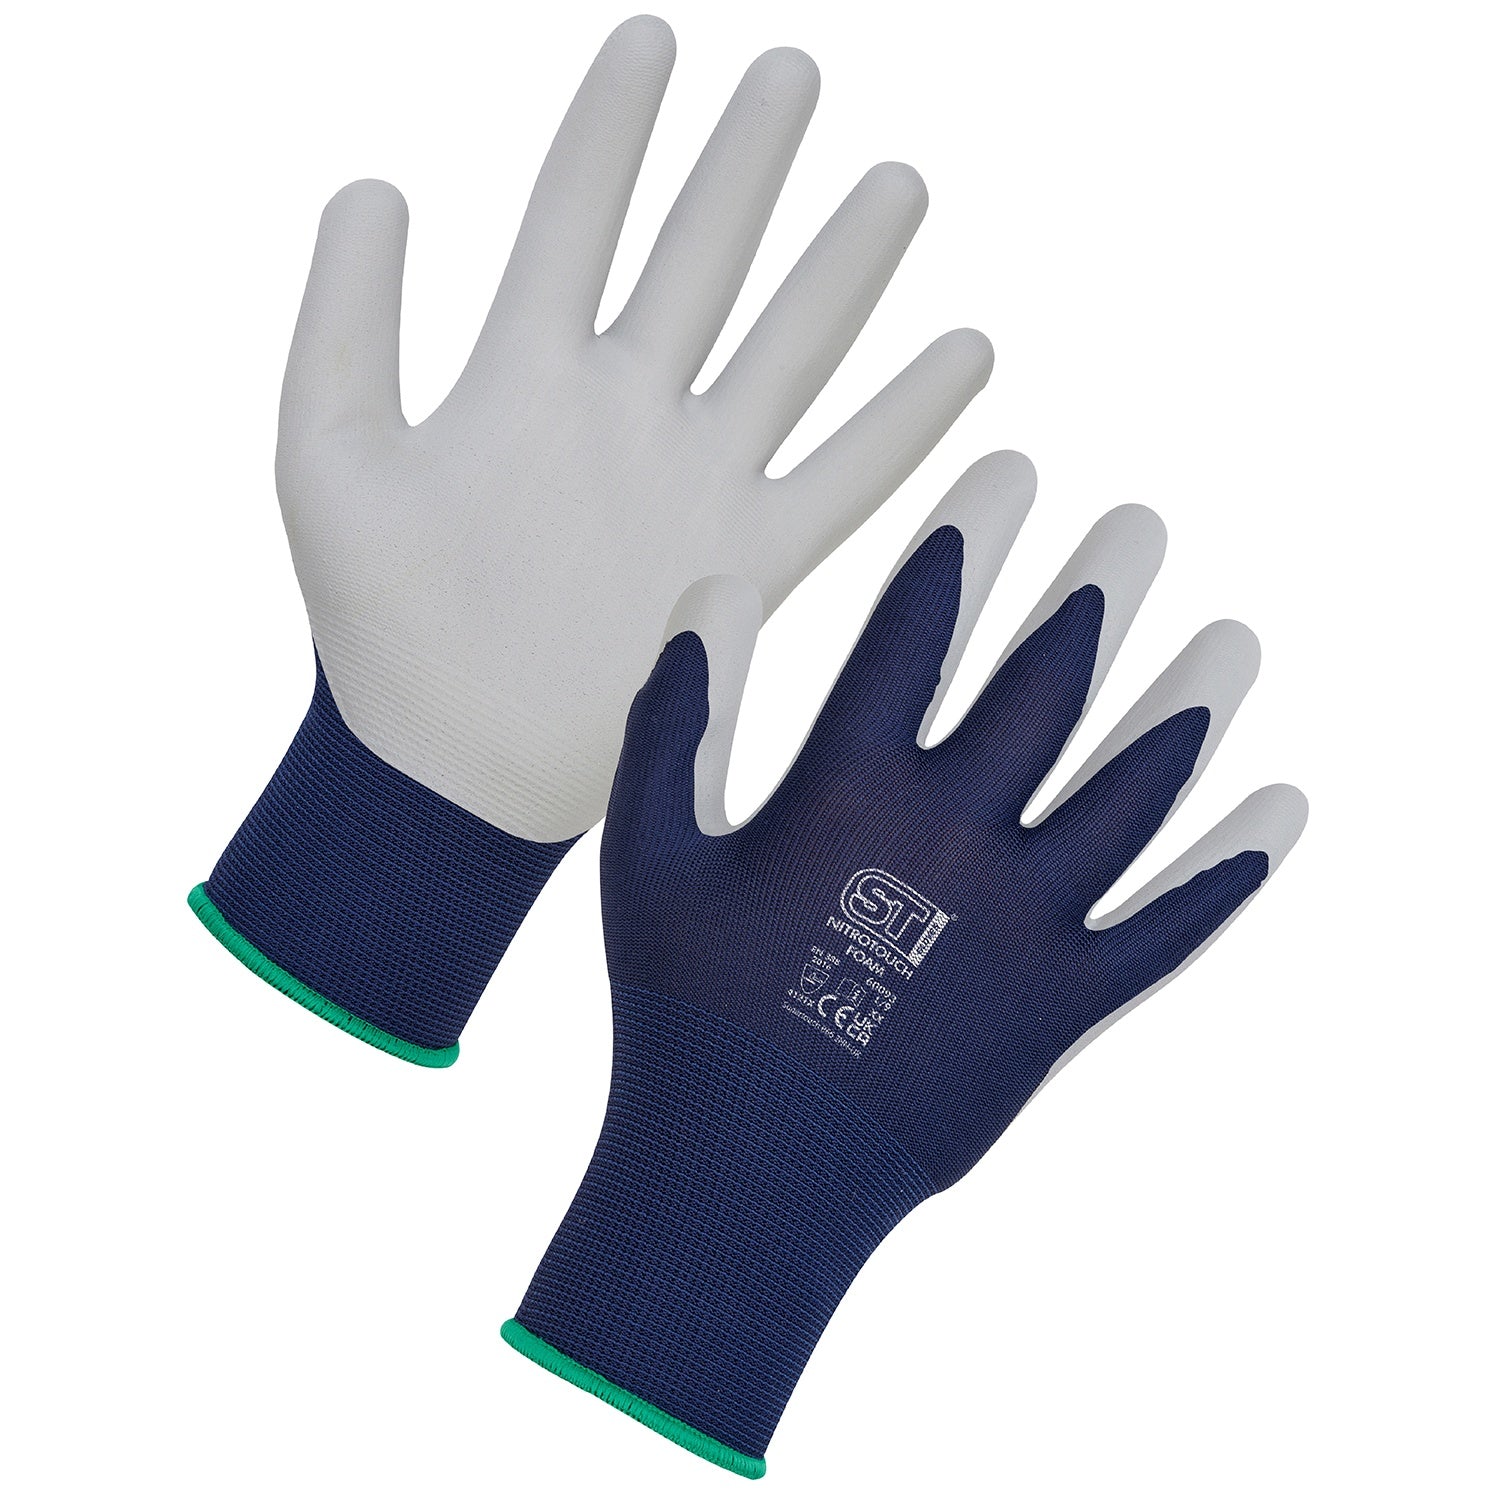 Supertouch New Nitrotouch Foam Gloves